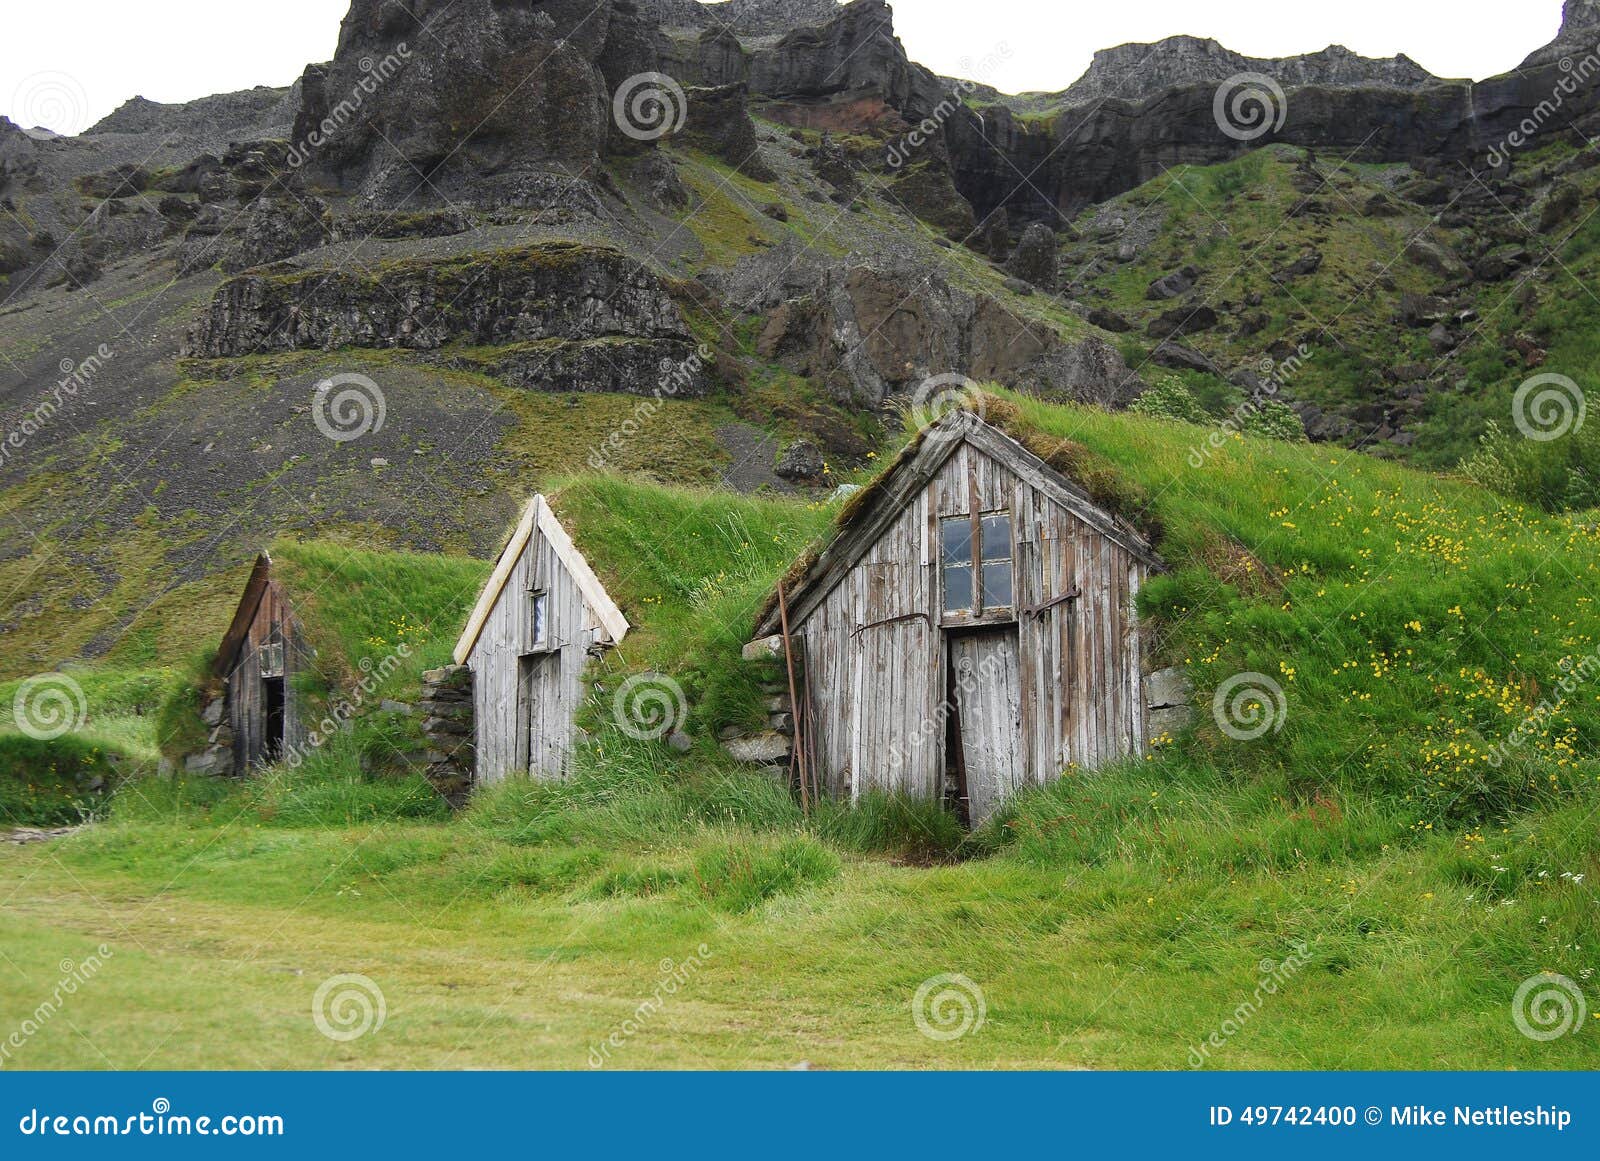 grass roofed houses in iceland used as shelter for travellers